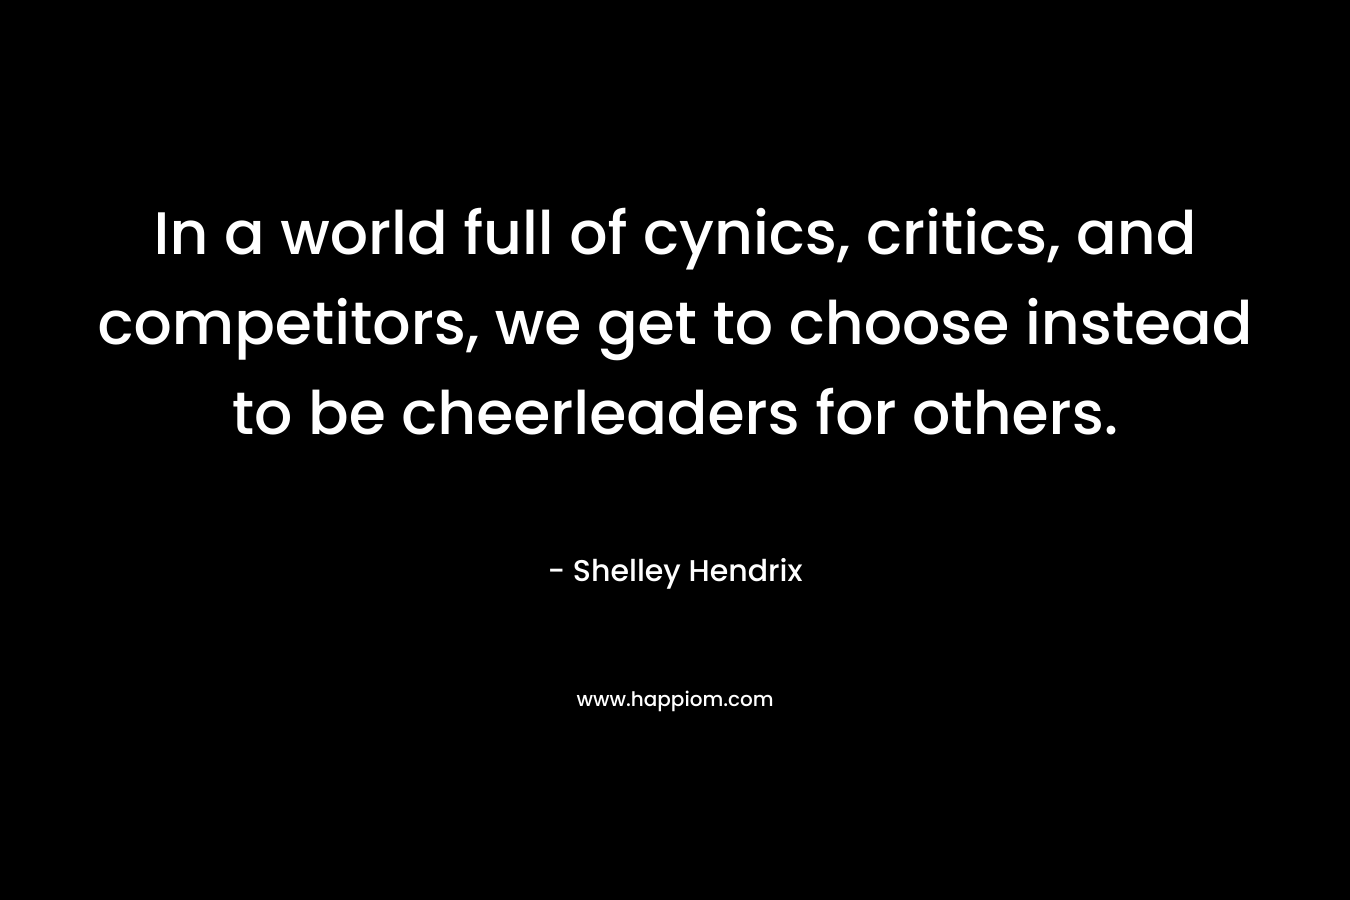 In a world full of cynics, critics, and competitors, we get to choose instead to be cheerleaders for others.